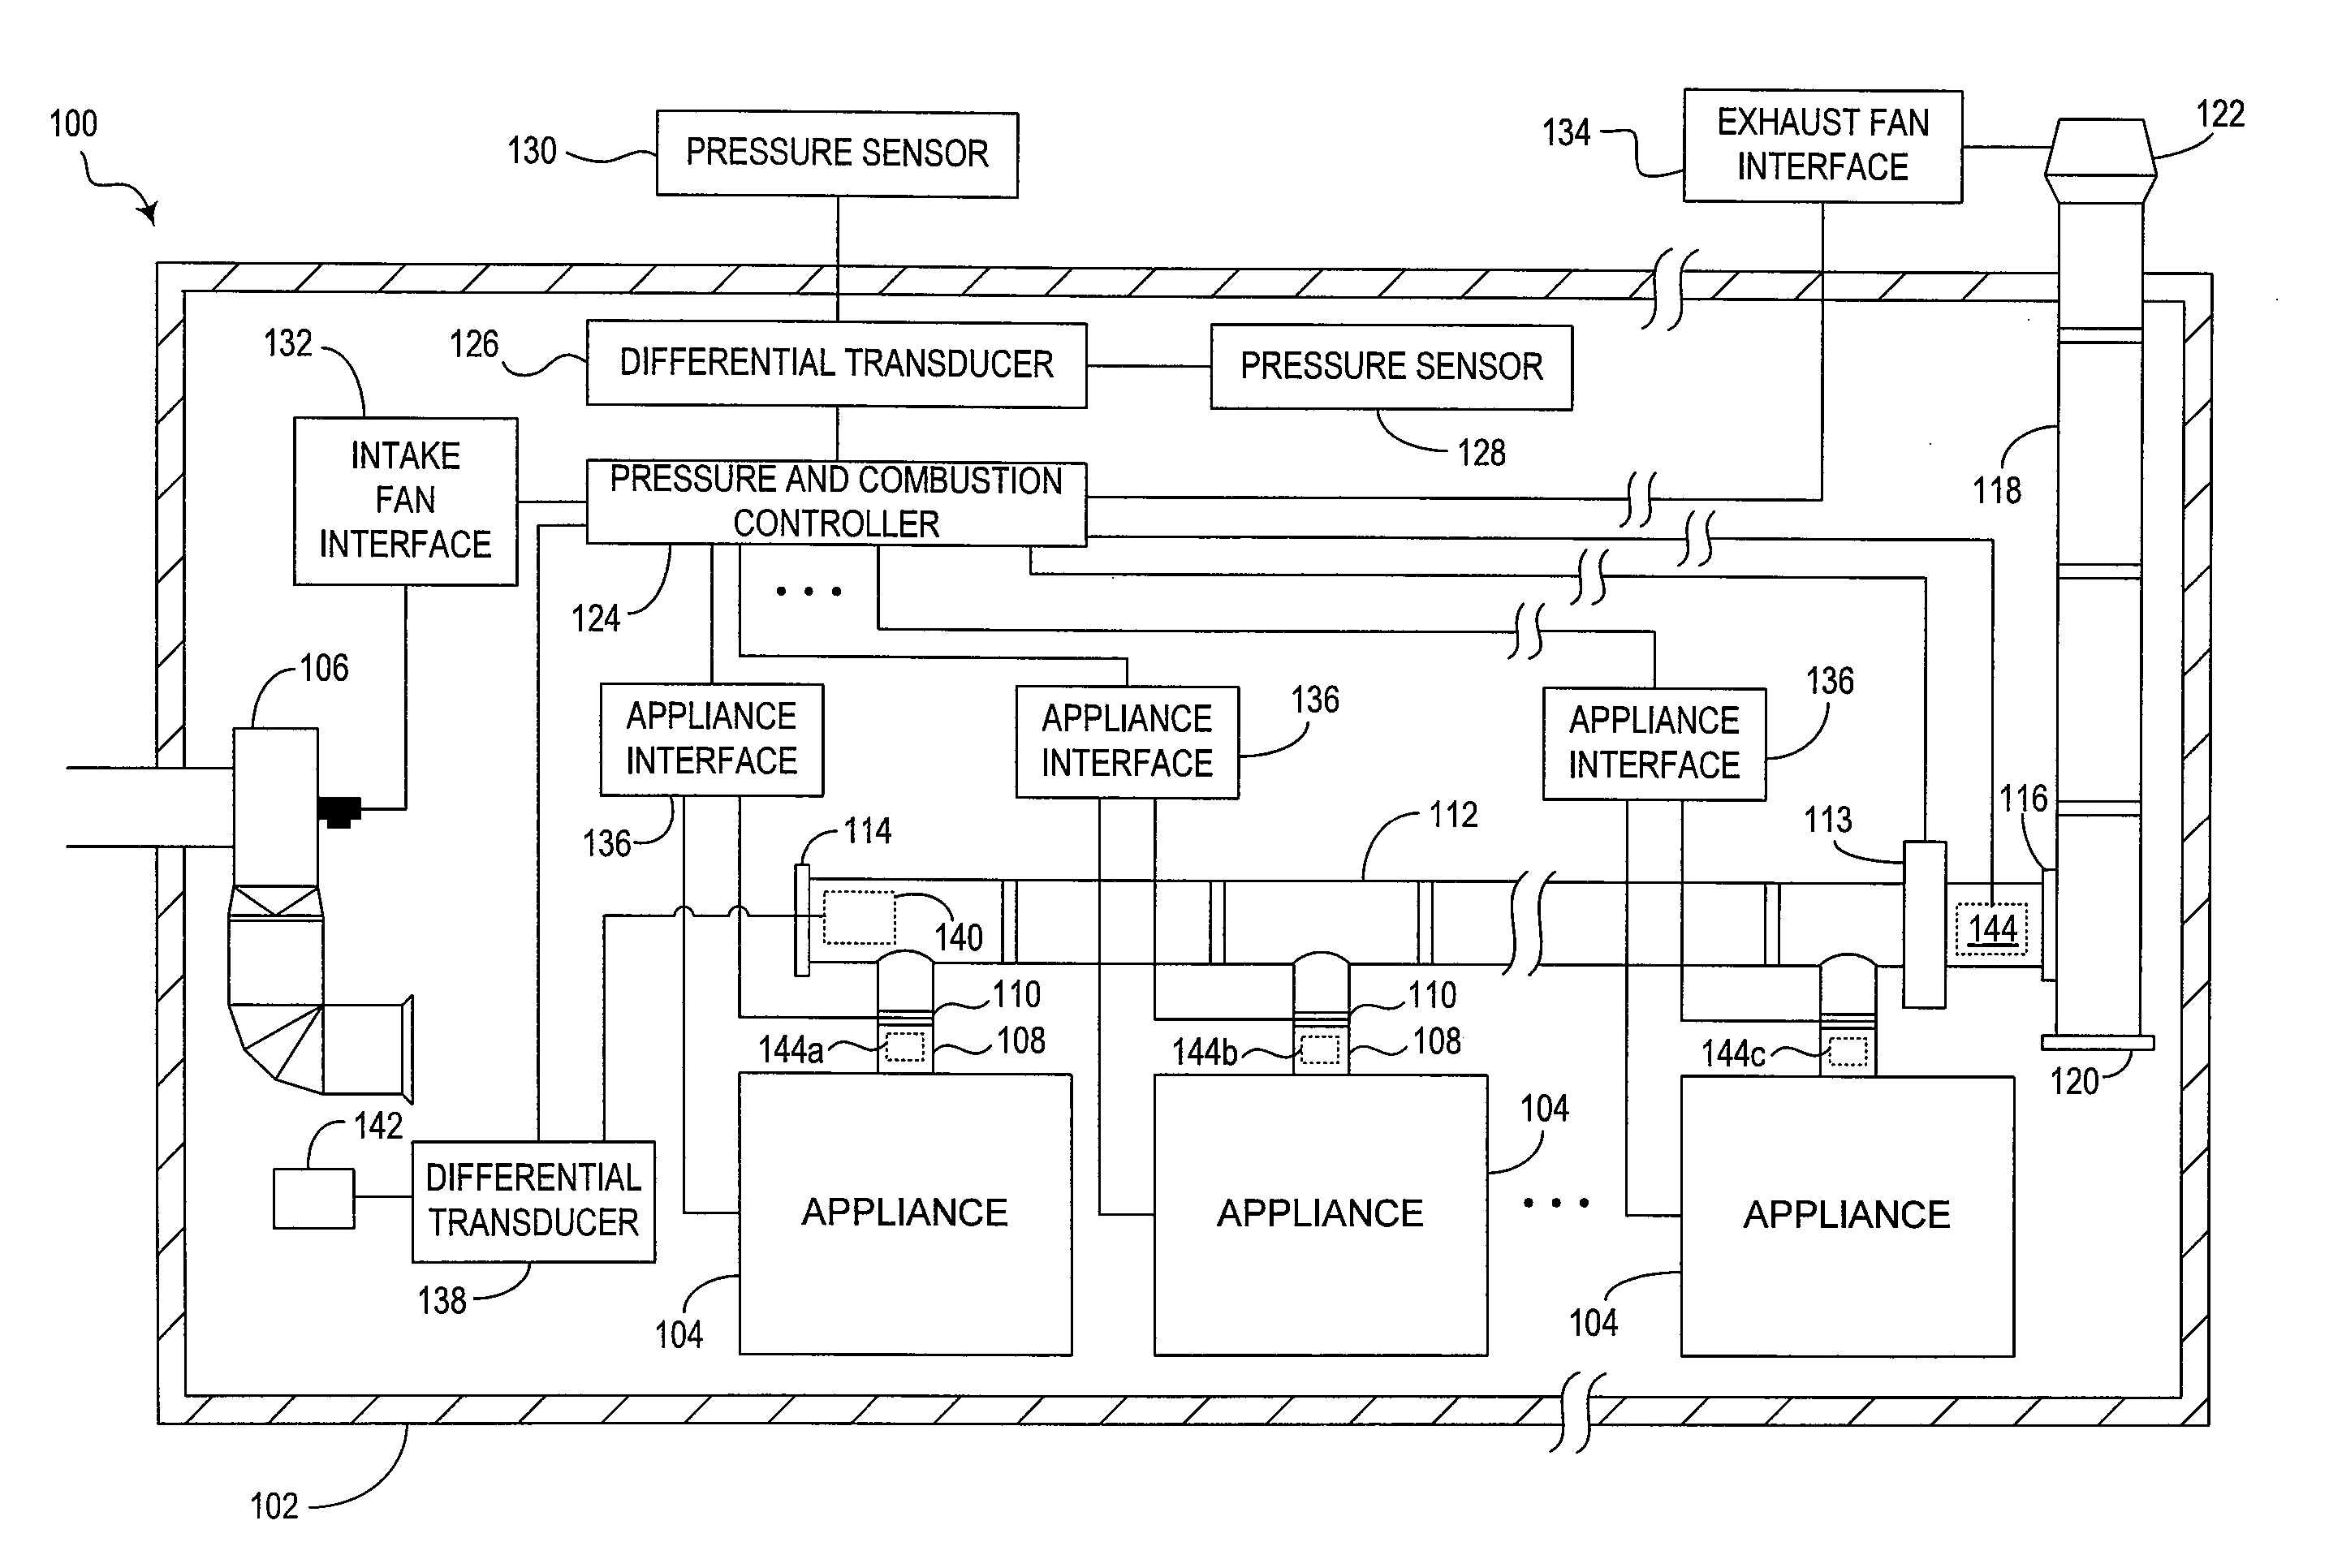 Pressure Controller for a Mechanical Draft System